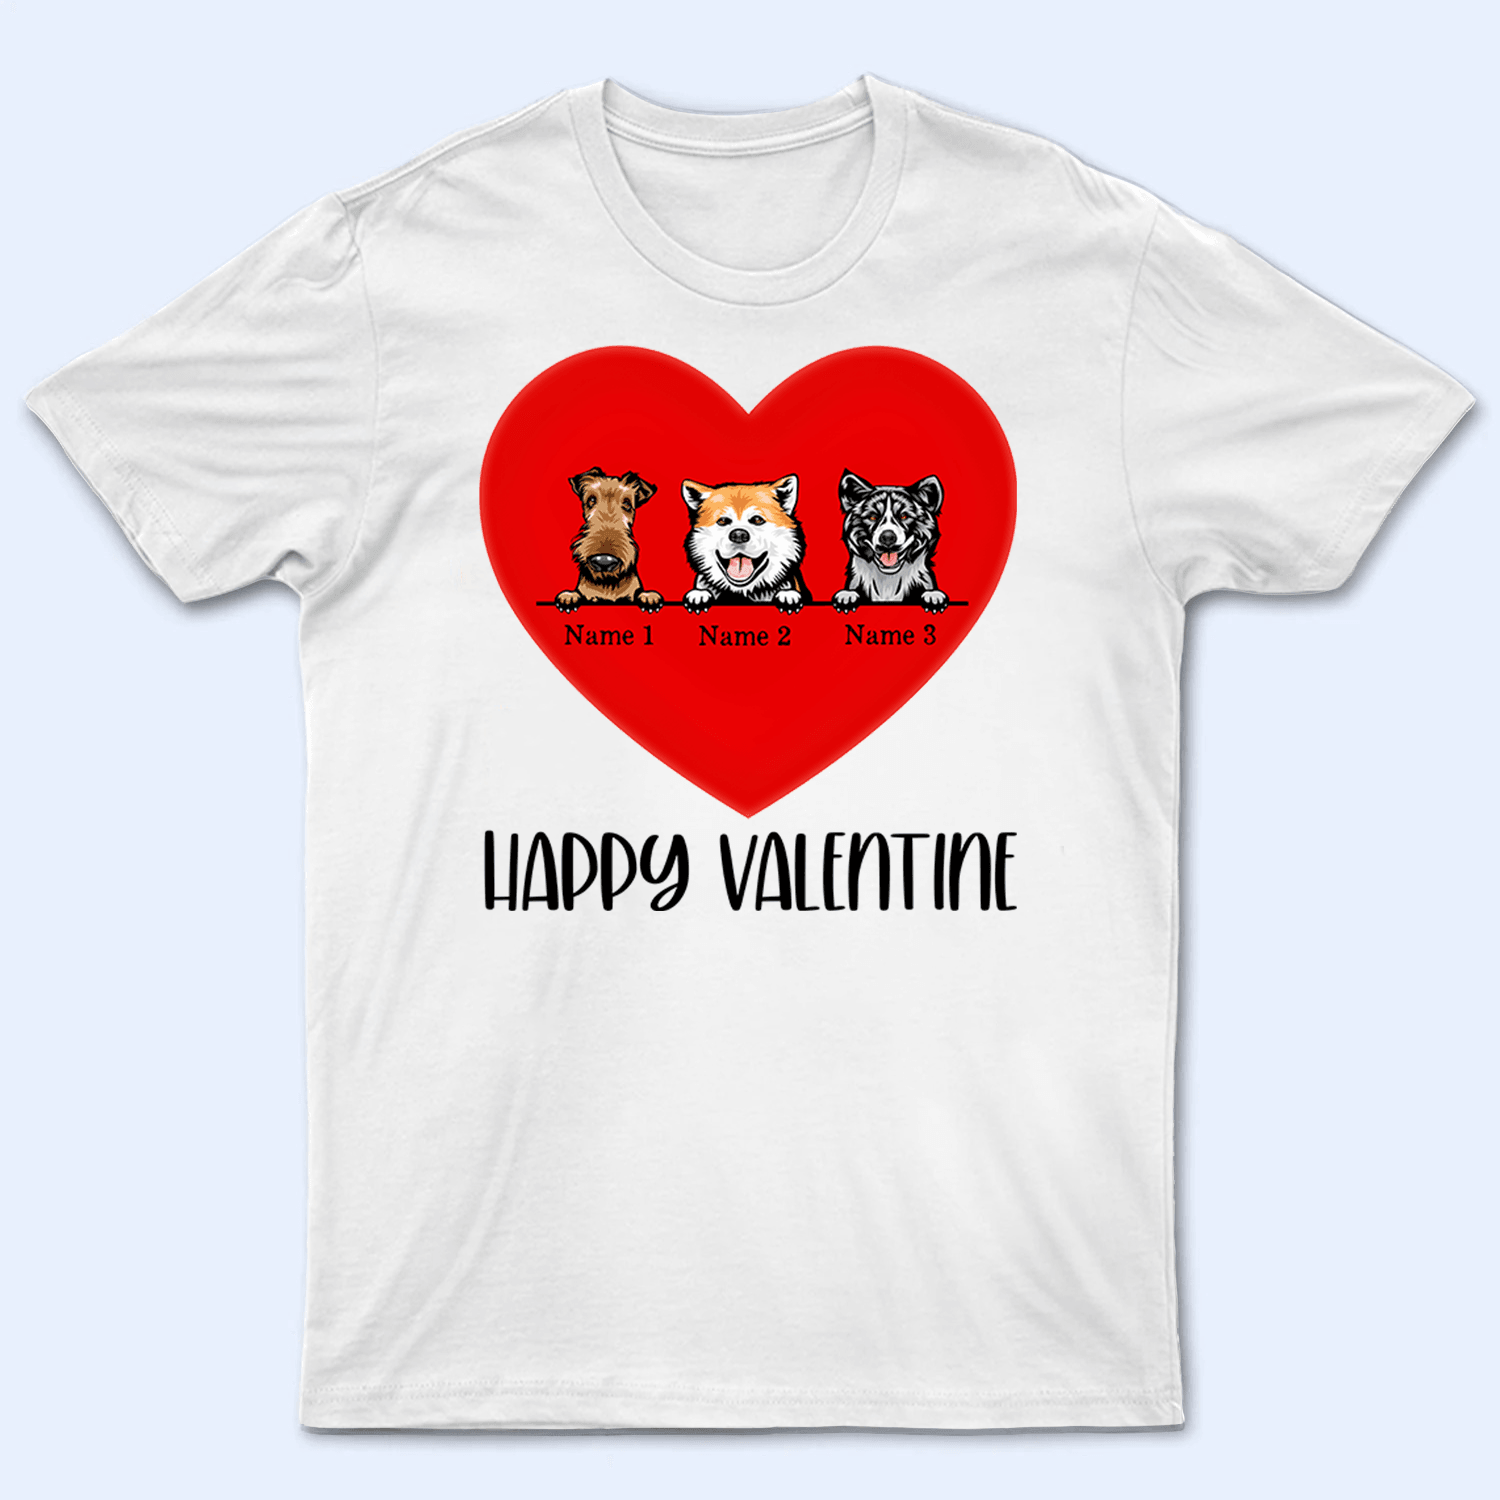 All Heart For My Dogs - Personalized Custom T Shirt - Birthday, Loving, Funny Gift For Dog Dad, Dog Owner, Dog Lovers - Suzitee Store